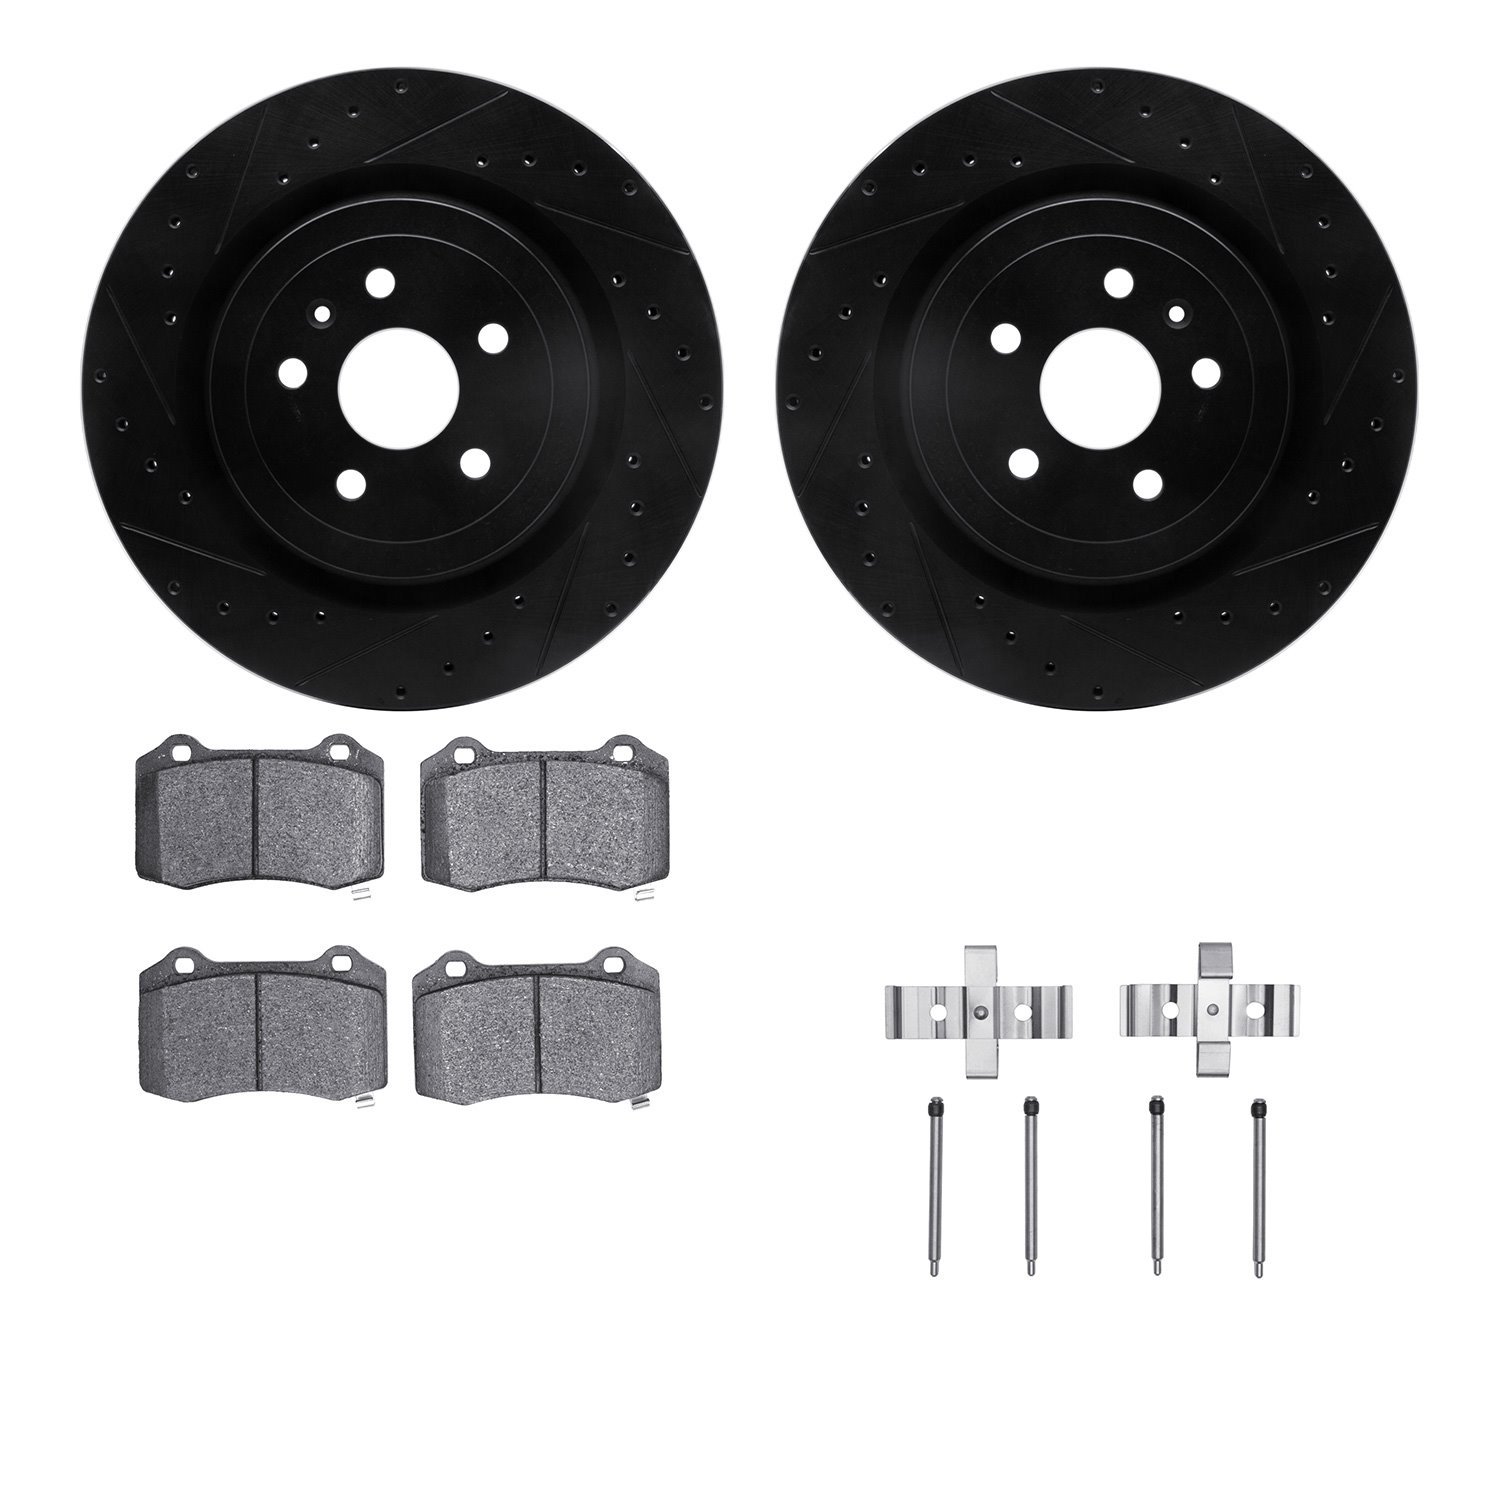 8412-47008 Drilled/Slotted Brake Rotors with Ultimate-Duty Brake Pads Kit & Hardware [Black], Fits Select GM, Position: Rear